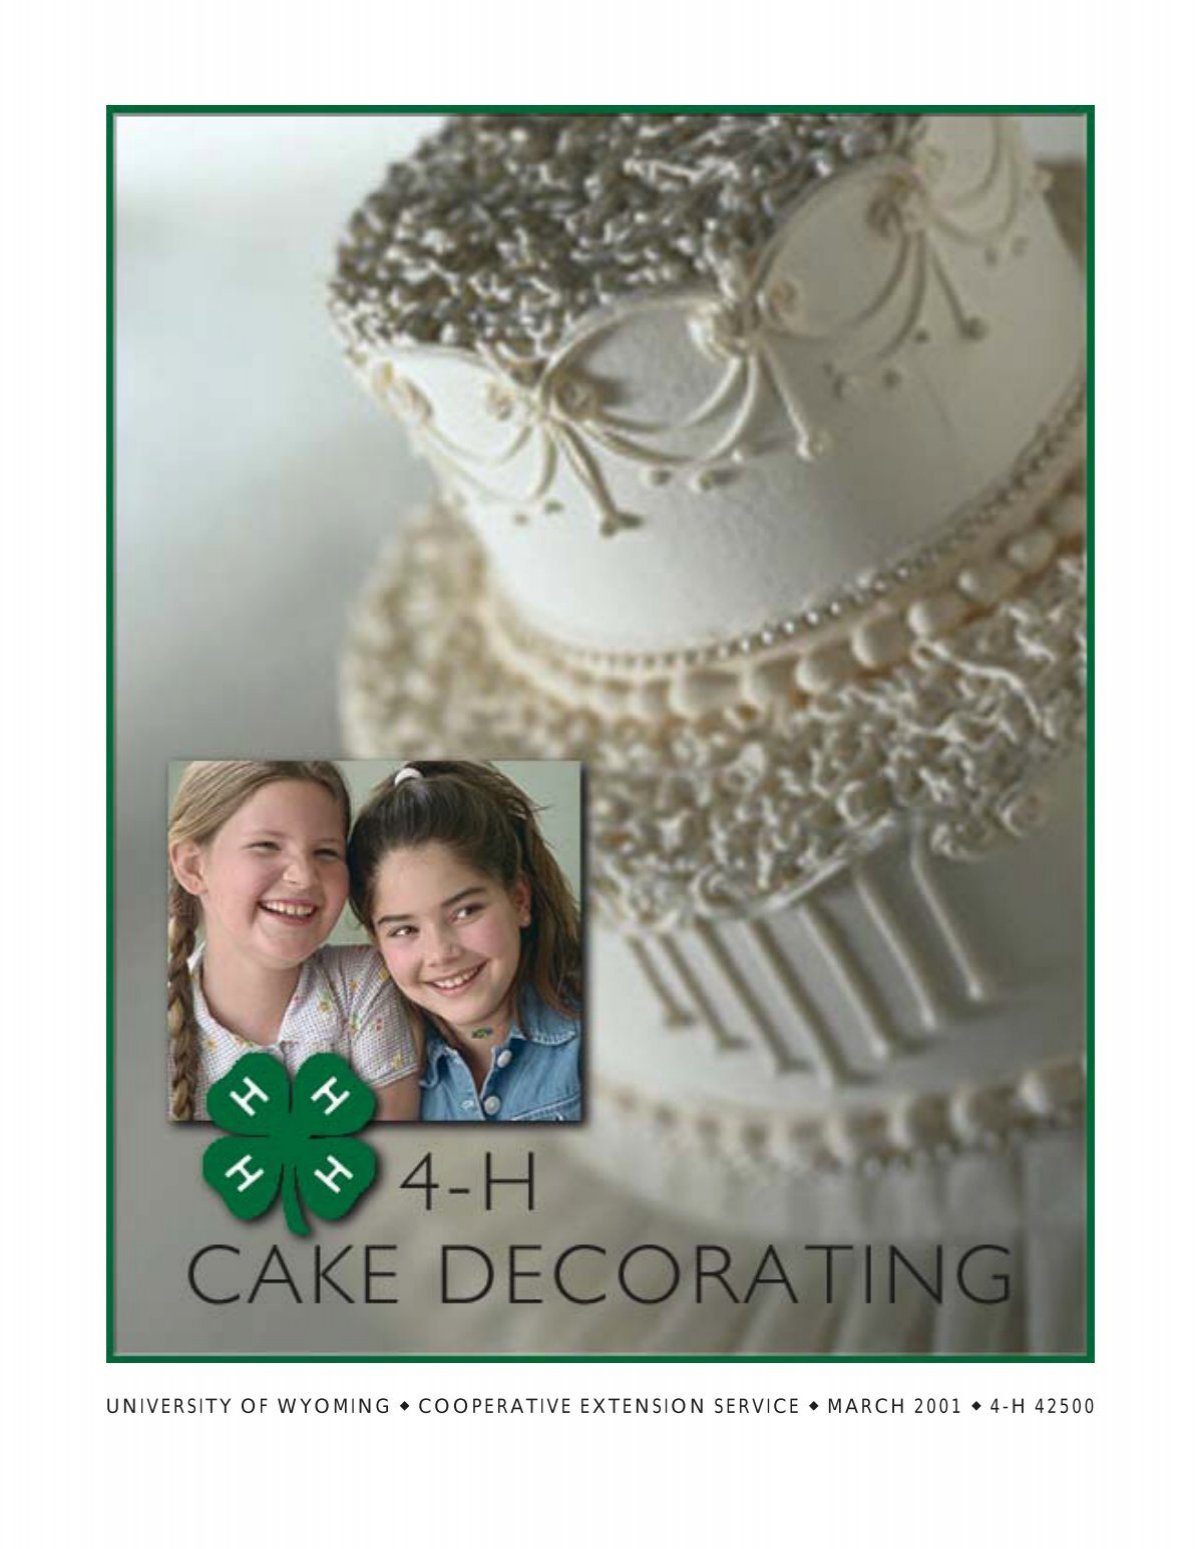 Visual guide helps cake decorators learn stylish techniques - Bakers Journal